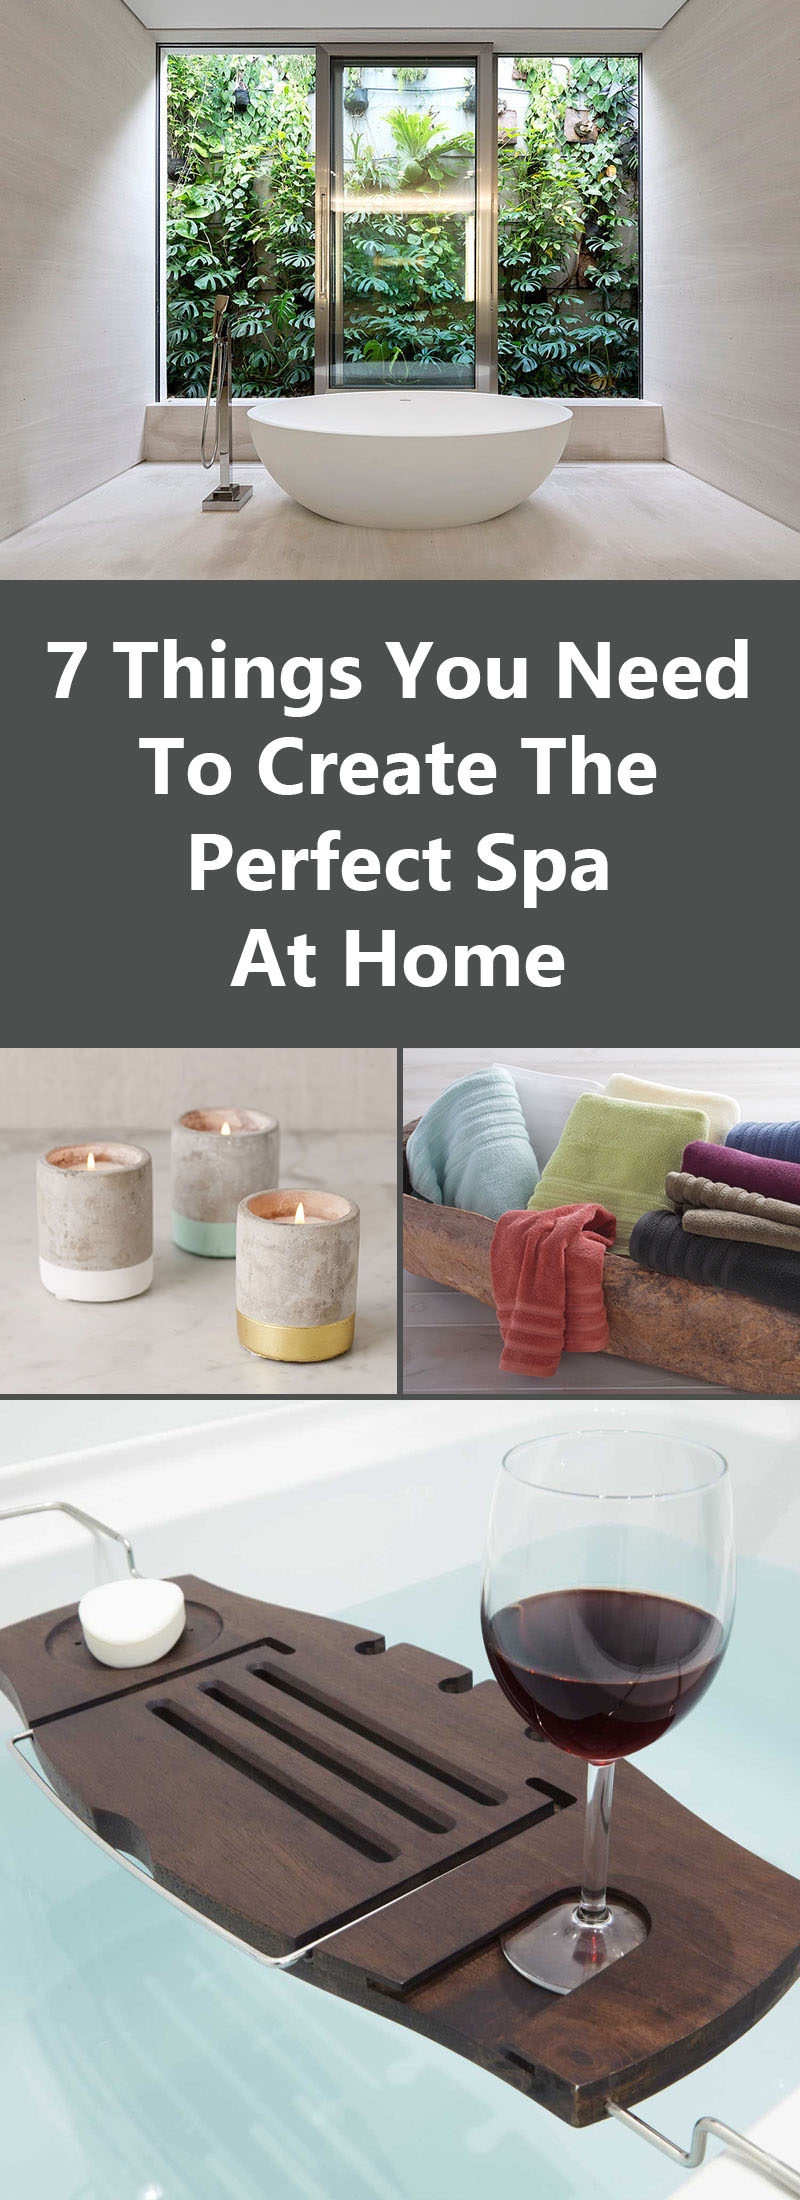 7 Things You Need To Create The Perfect Spa At Home